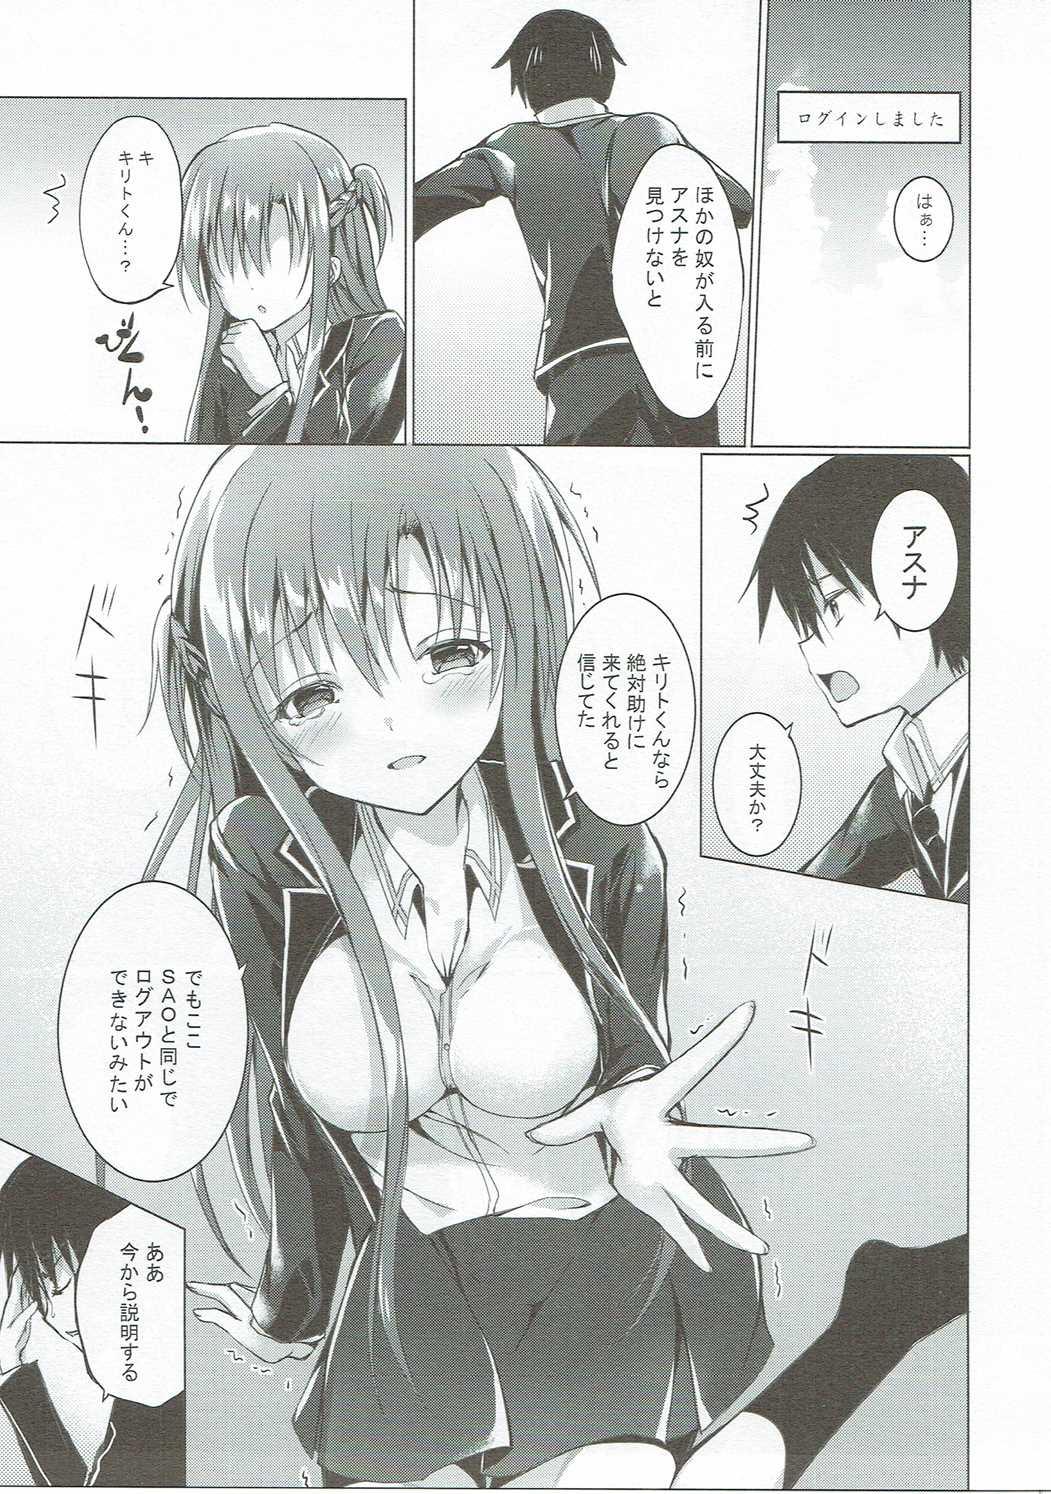 Flaca Asuna to VR Game - Sword art online Tight - Page 6